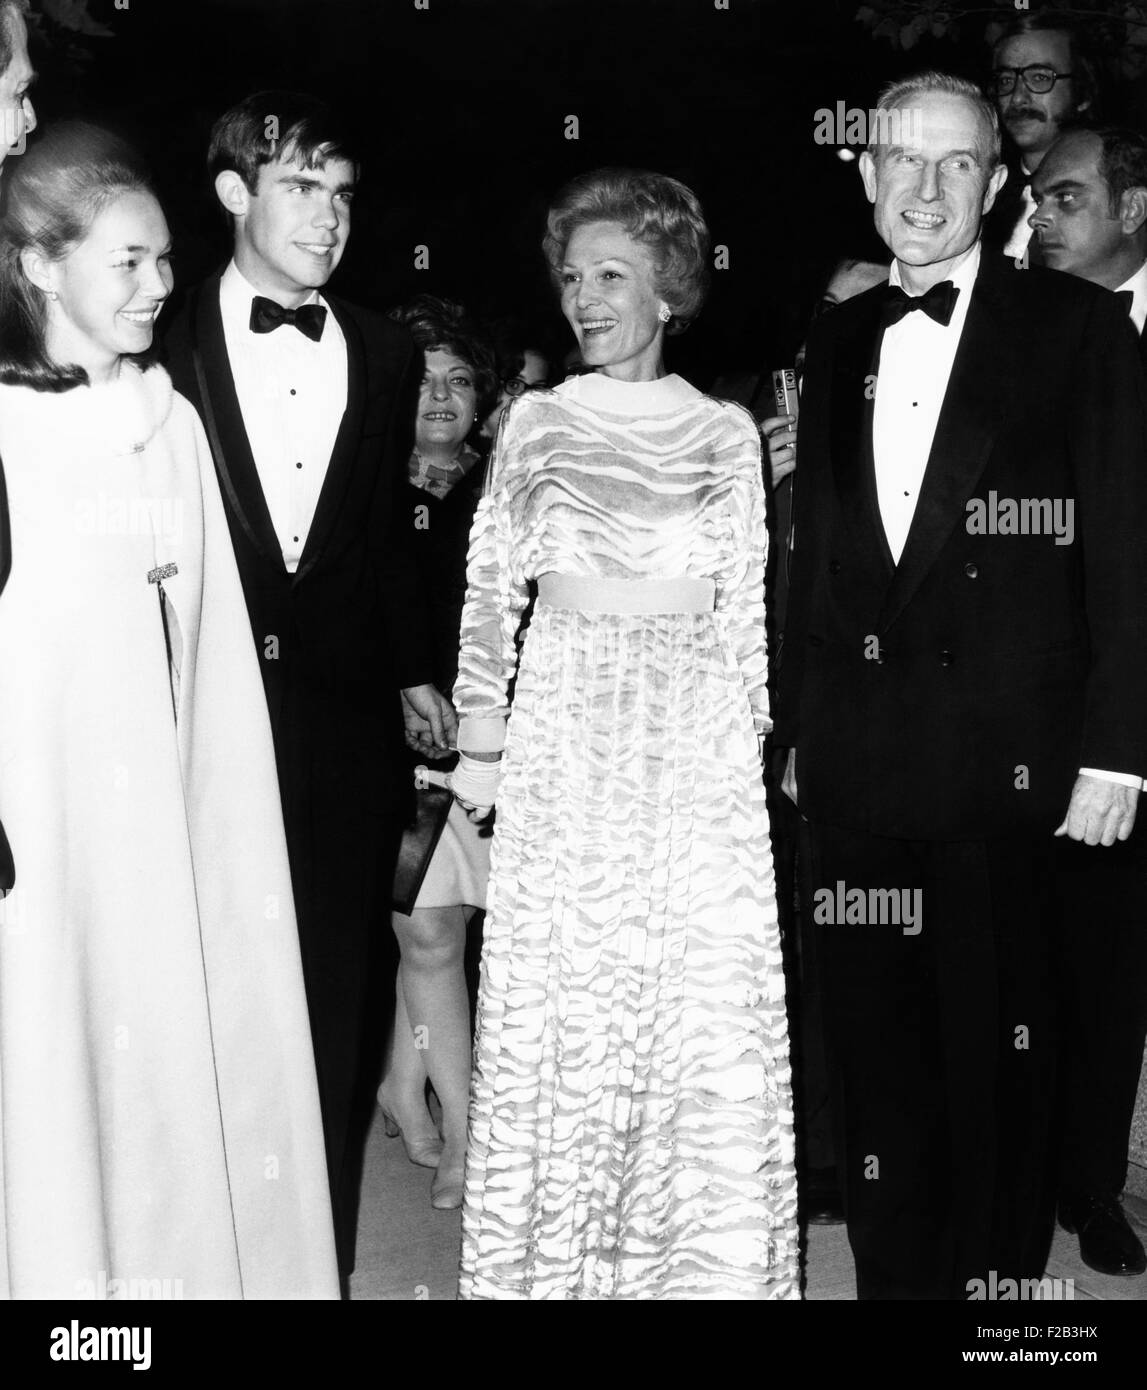 First Lady Pat Nixon and John D. Rockefeller III, at the new Juilliard School of Music. October 26, 1969. With daughter Julie and her husband David Eisenhower, they mark the completion of the last building of the Lincoln Center complex. - (CSU 2015 6 198) Stock Photo